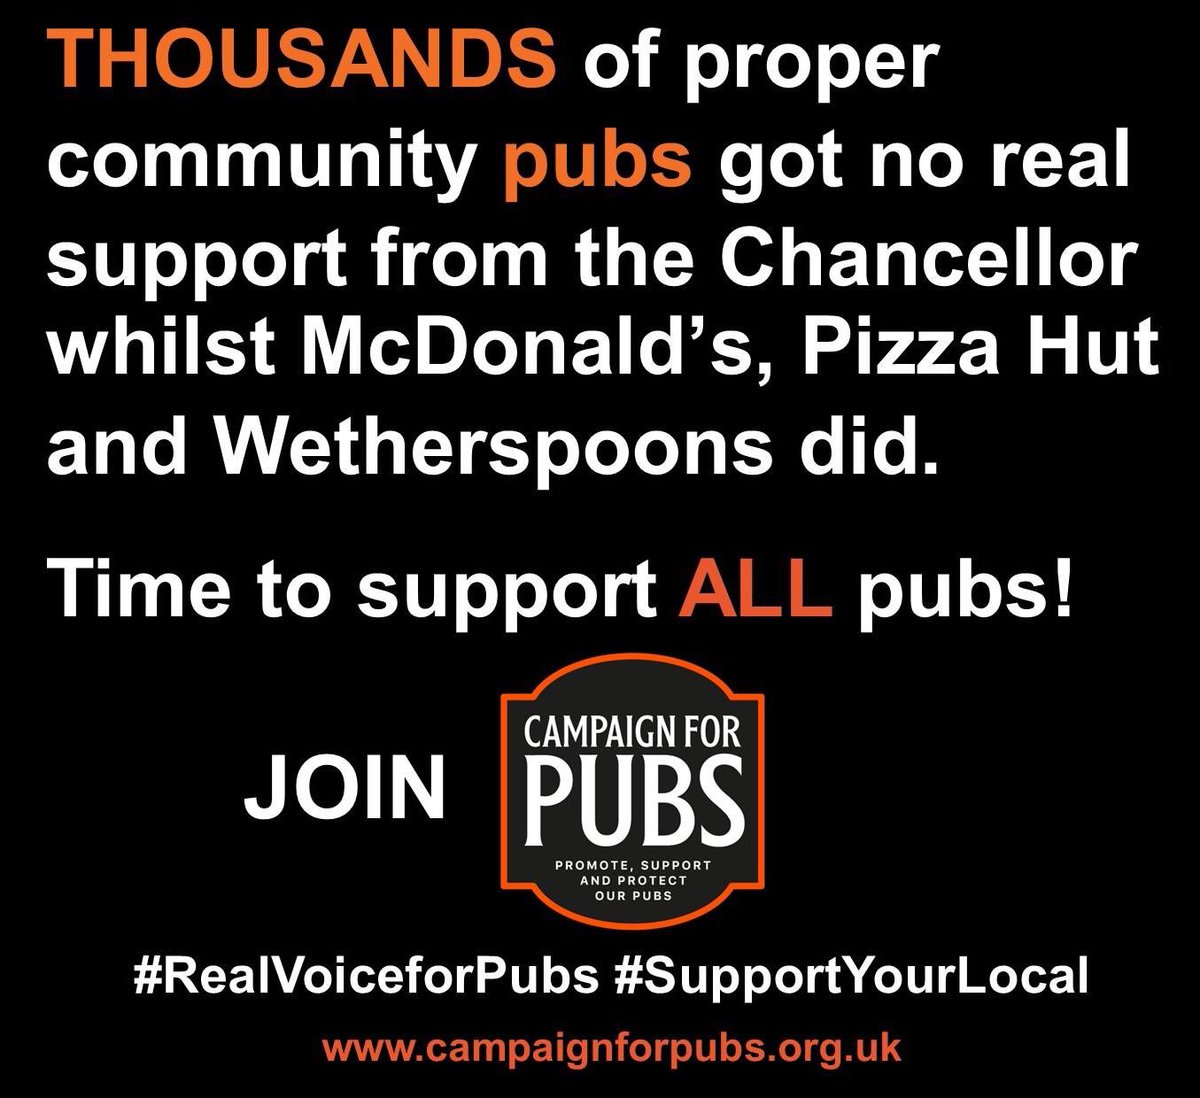 This is the reality of the Chancellor’s announcement last week. Thousands of REAL #pubs let down with no support.

It’s time to stand up for proper pubs & #independent #brewers & #cider makers & fight for a less corporate fairer future!

#CampaignforPubs #RealVoiceforPubs #ukpubs